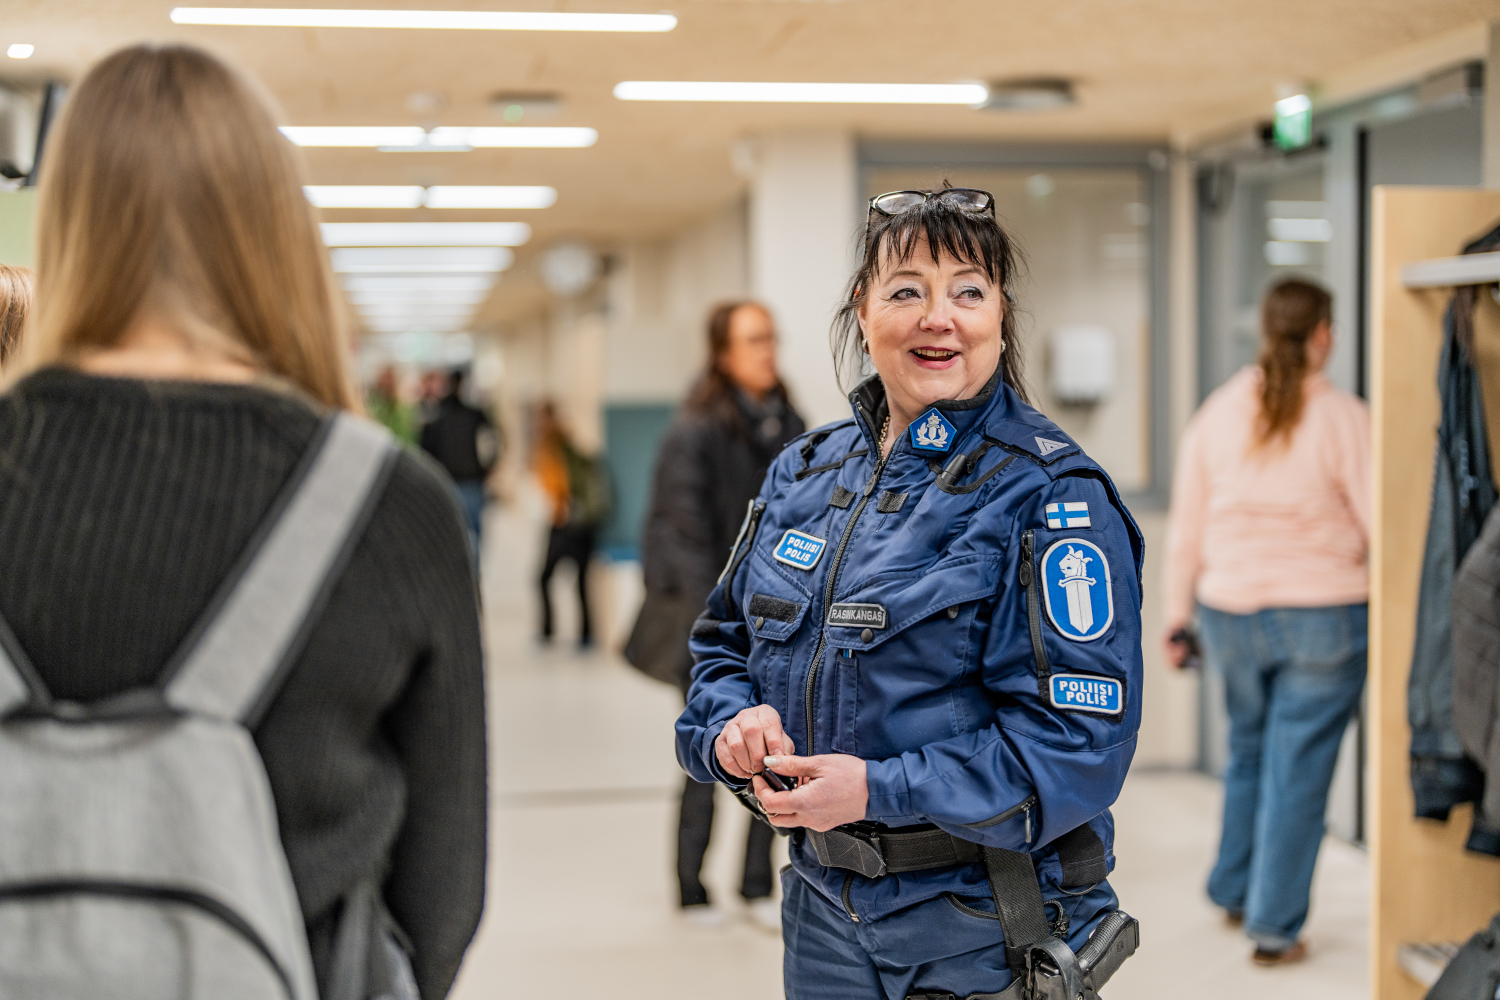 A police officer is standing in a school corridor and smiling.